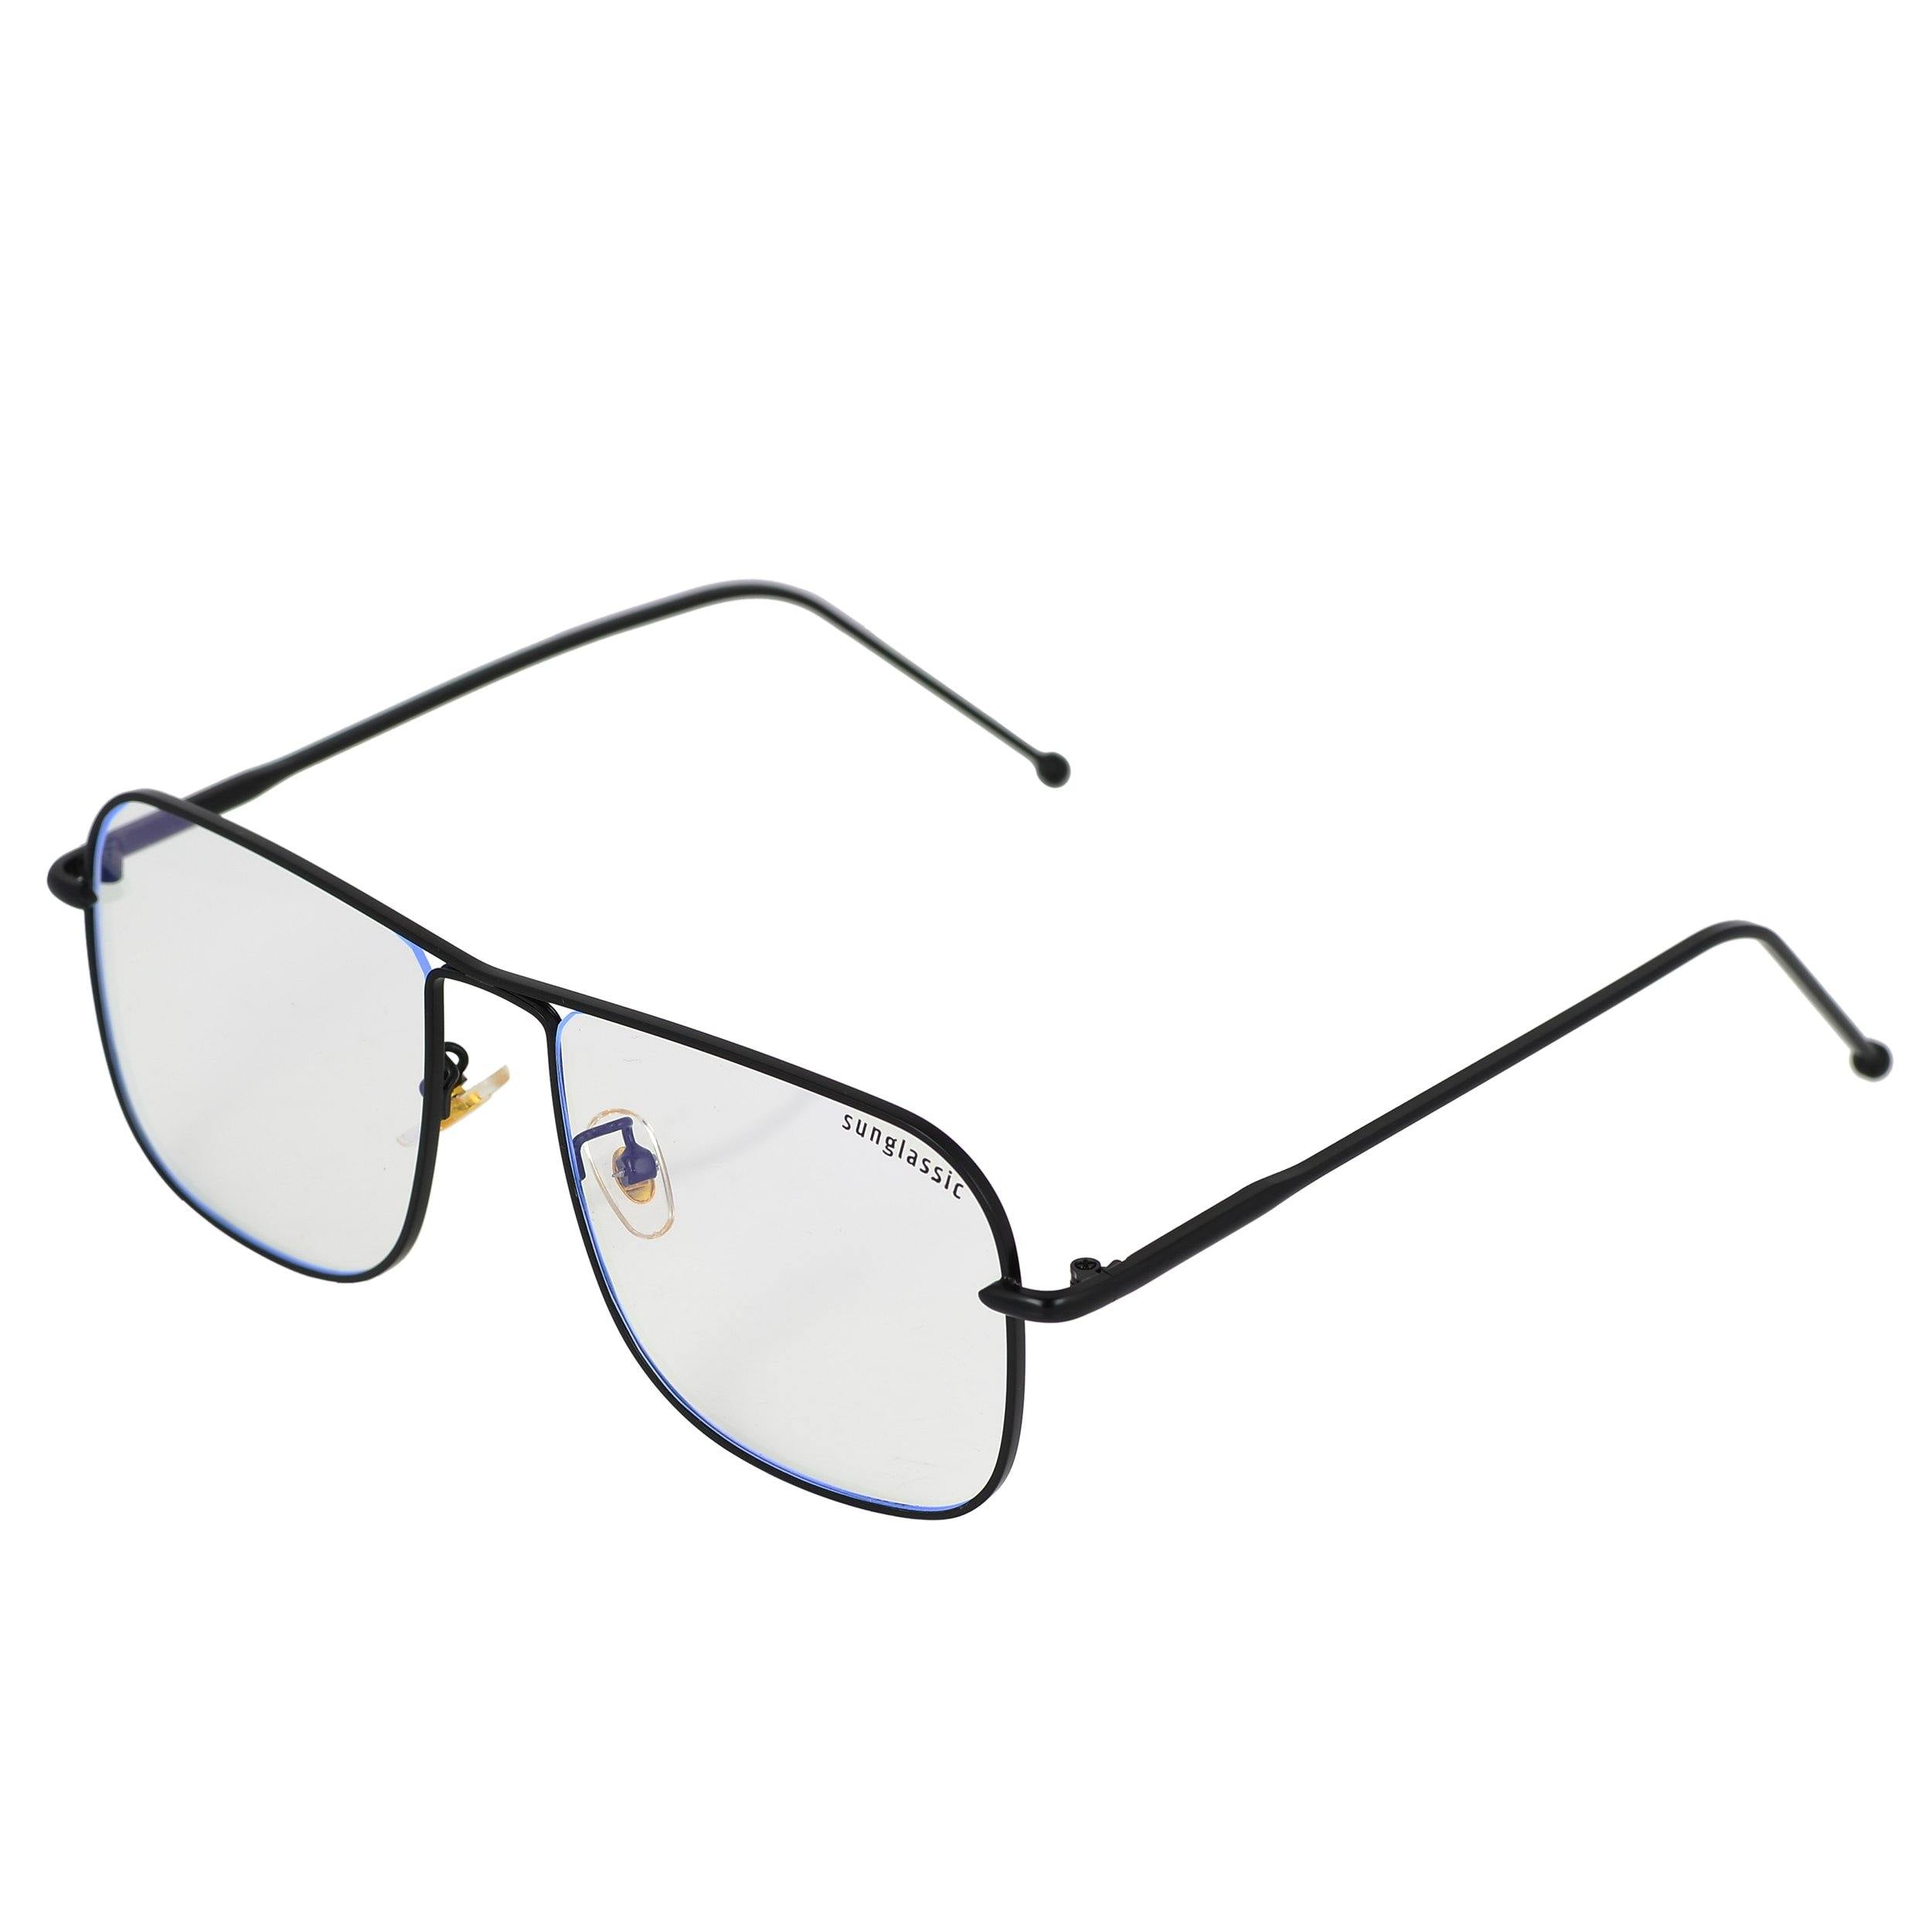 The Godfather Black Clear Square Sunglasses